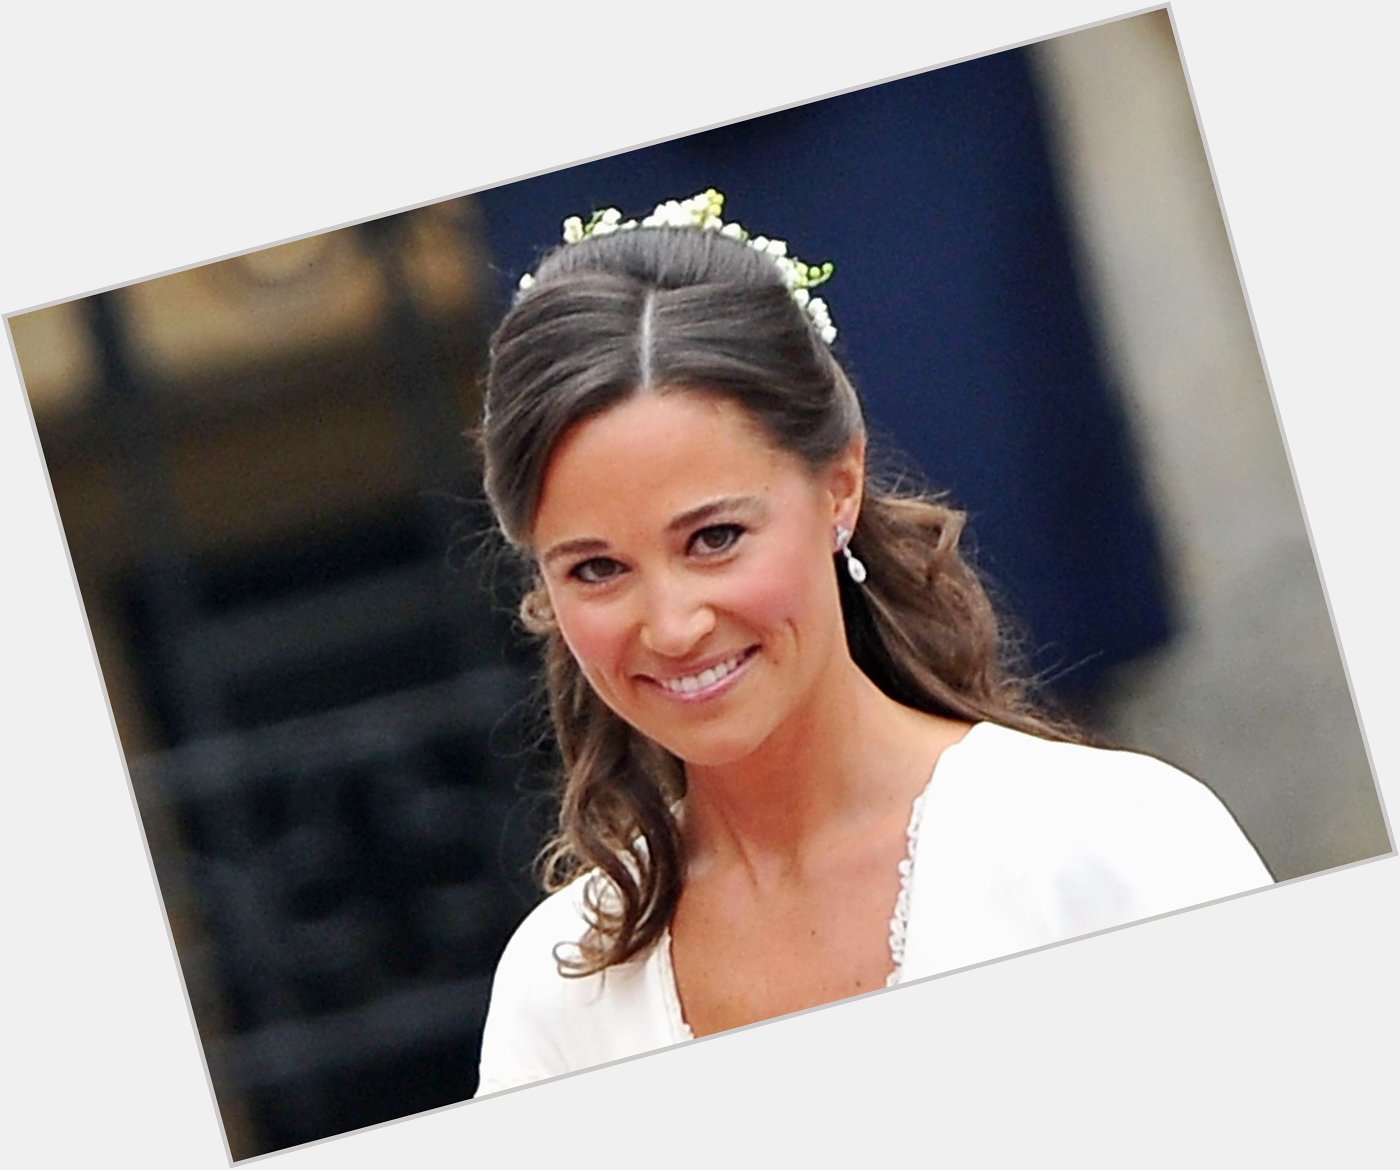 Happy 35th birthday to Pippa Middleton (Matthews) who was born on this day in 1983.  